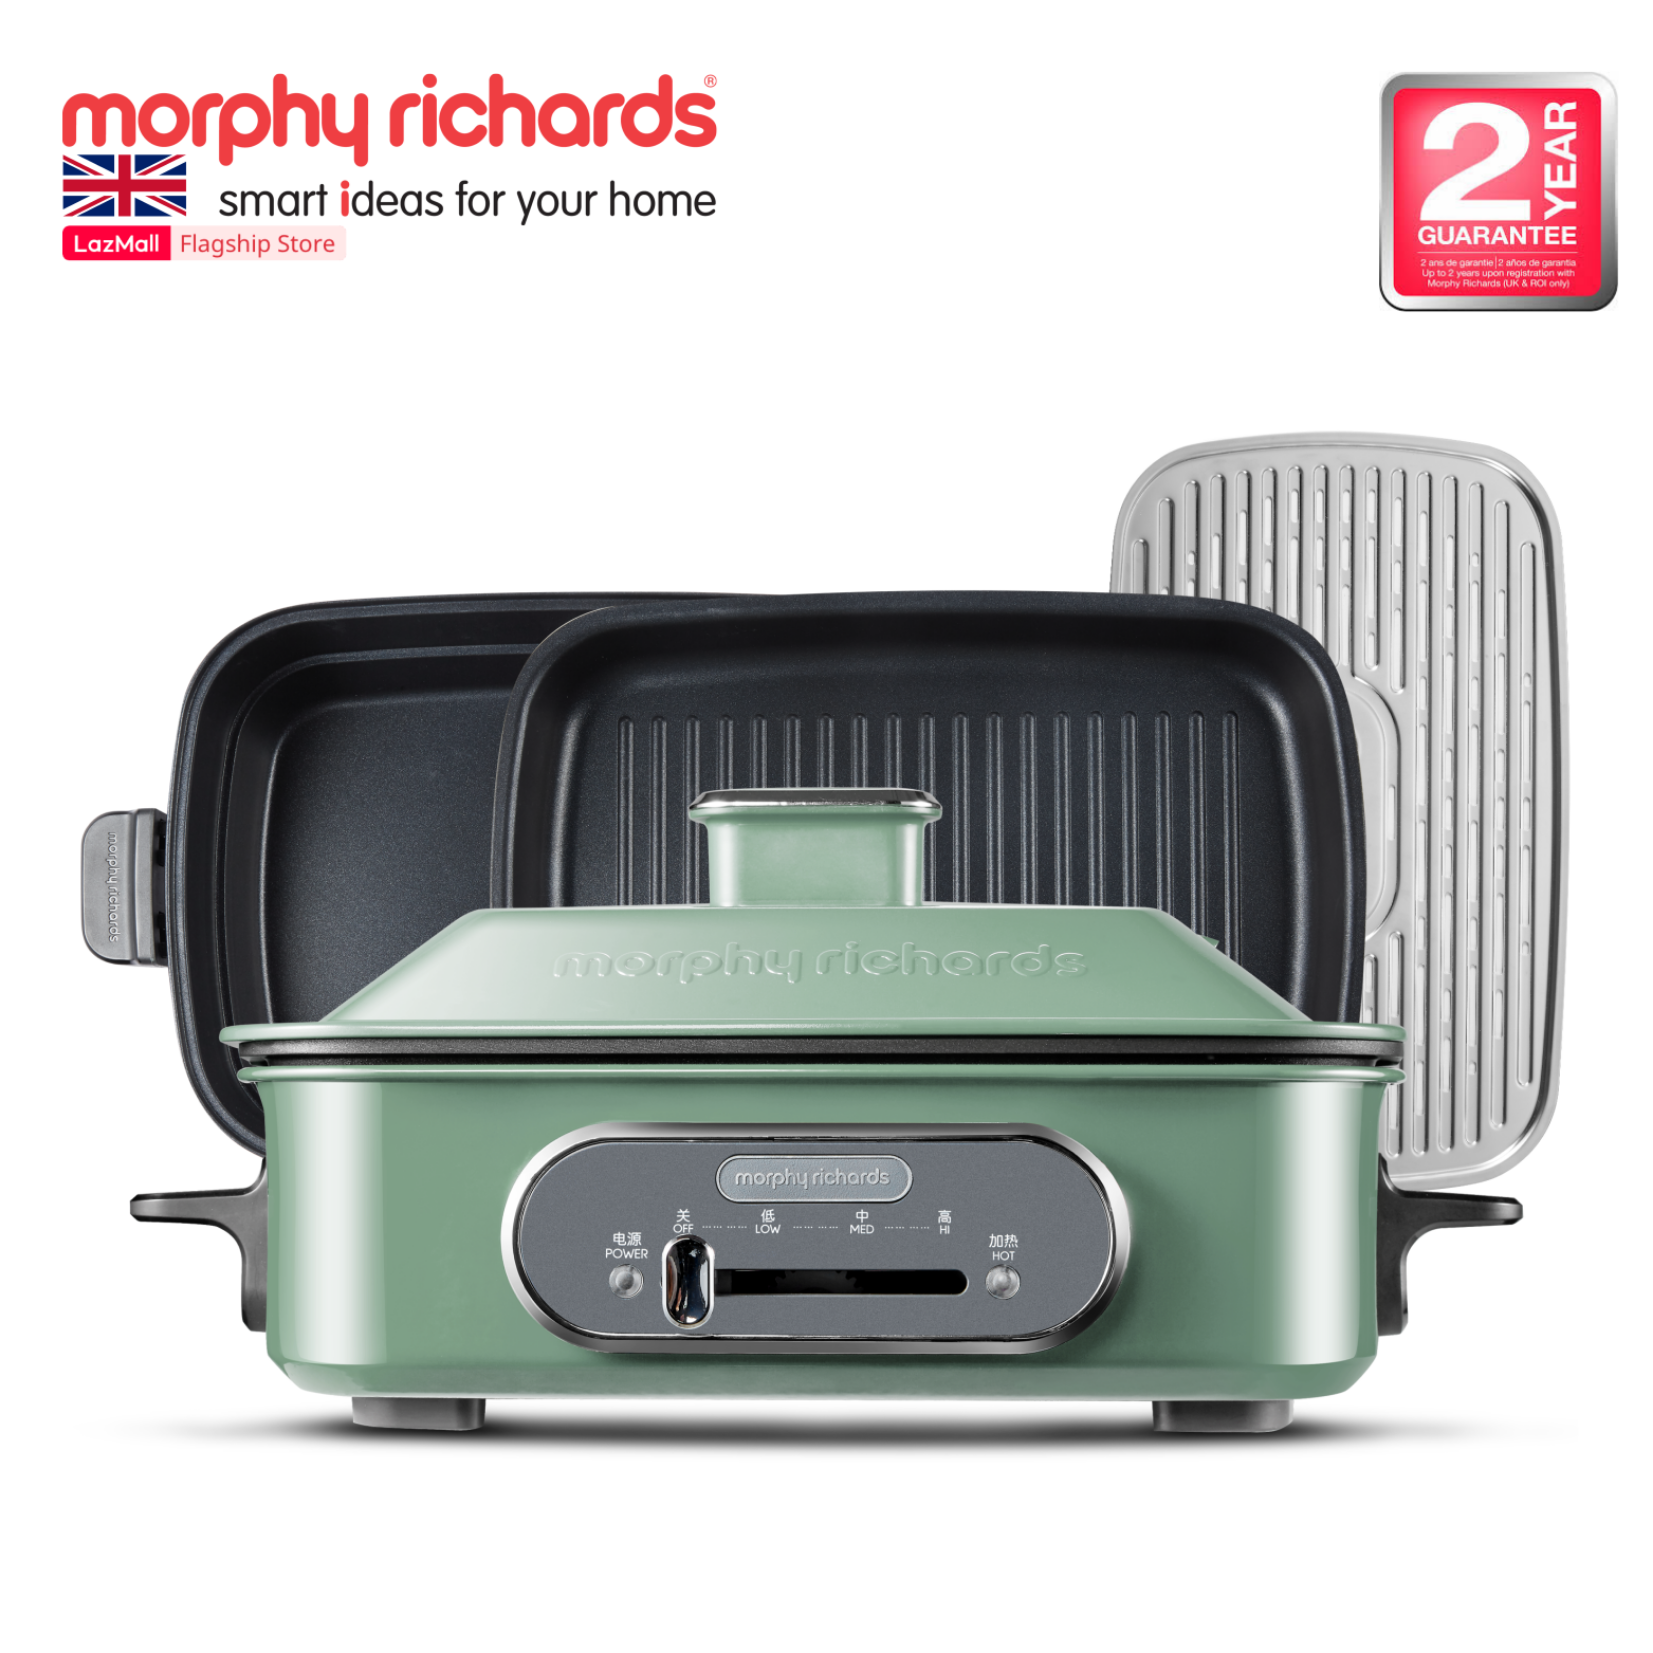 Morphy Richards Multicooker Non-Stick Material Hotpot BBQ Pan Grill - Evenly Heating | Easy Storage | Ergonomic Handled